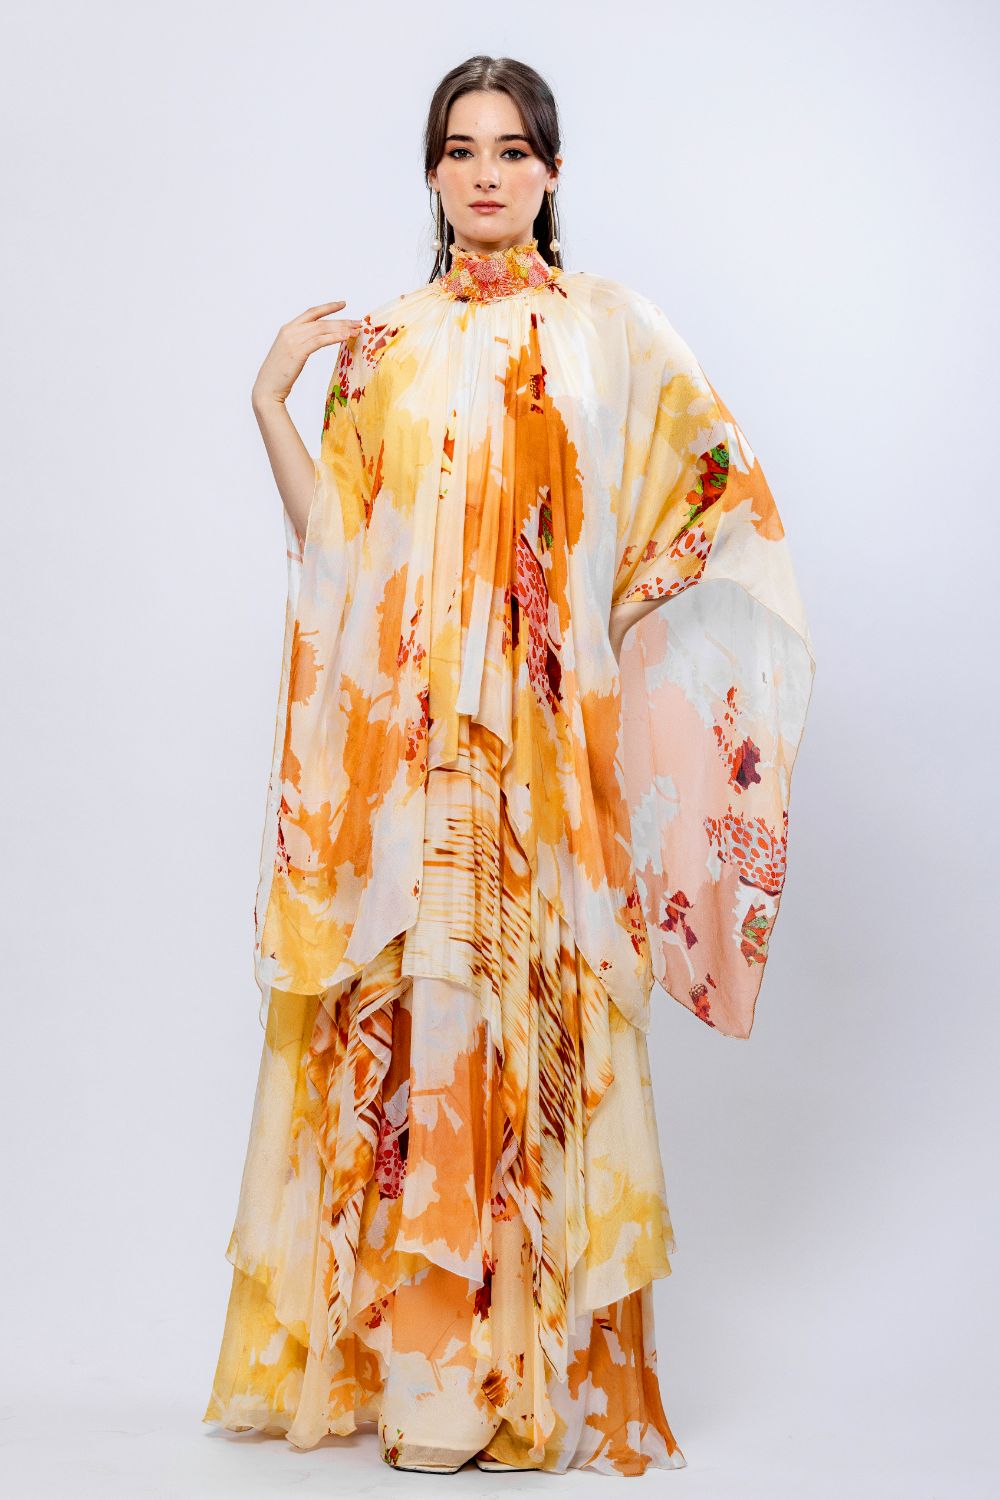 Apricot Crush Embroidered Maxi Dress